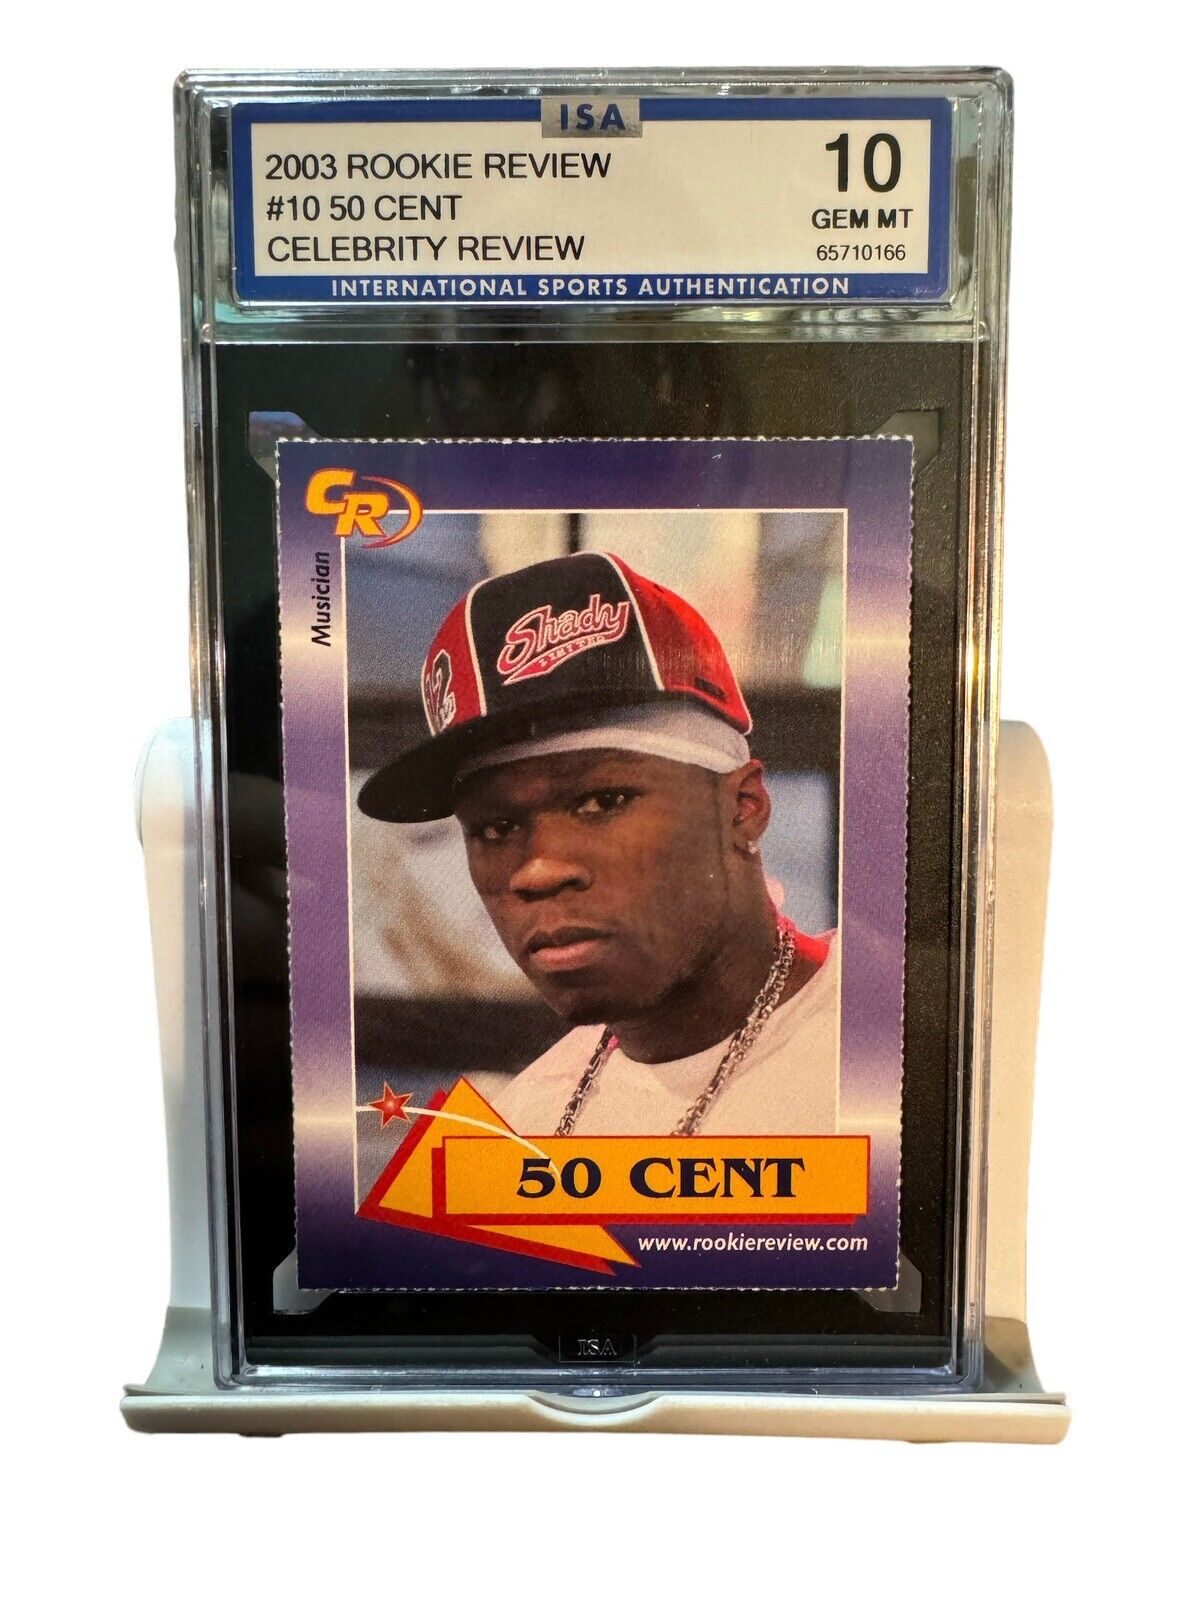 2003 Rookie Review #10 50 Cent Celebrity Review ISA 10 GEM MT